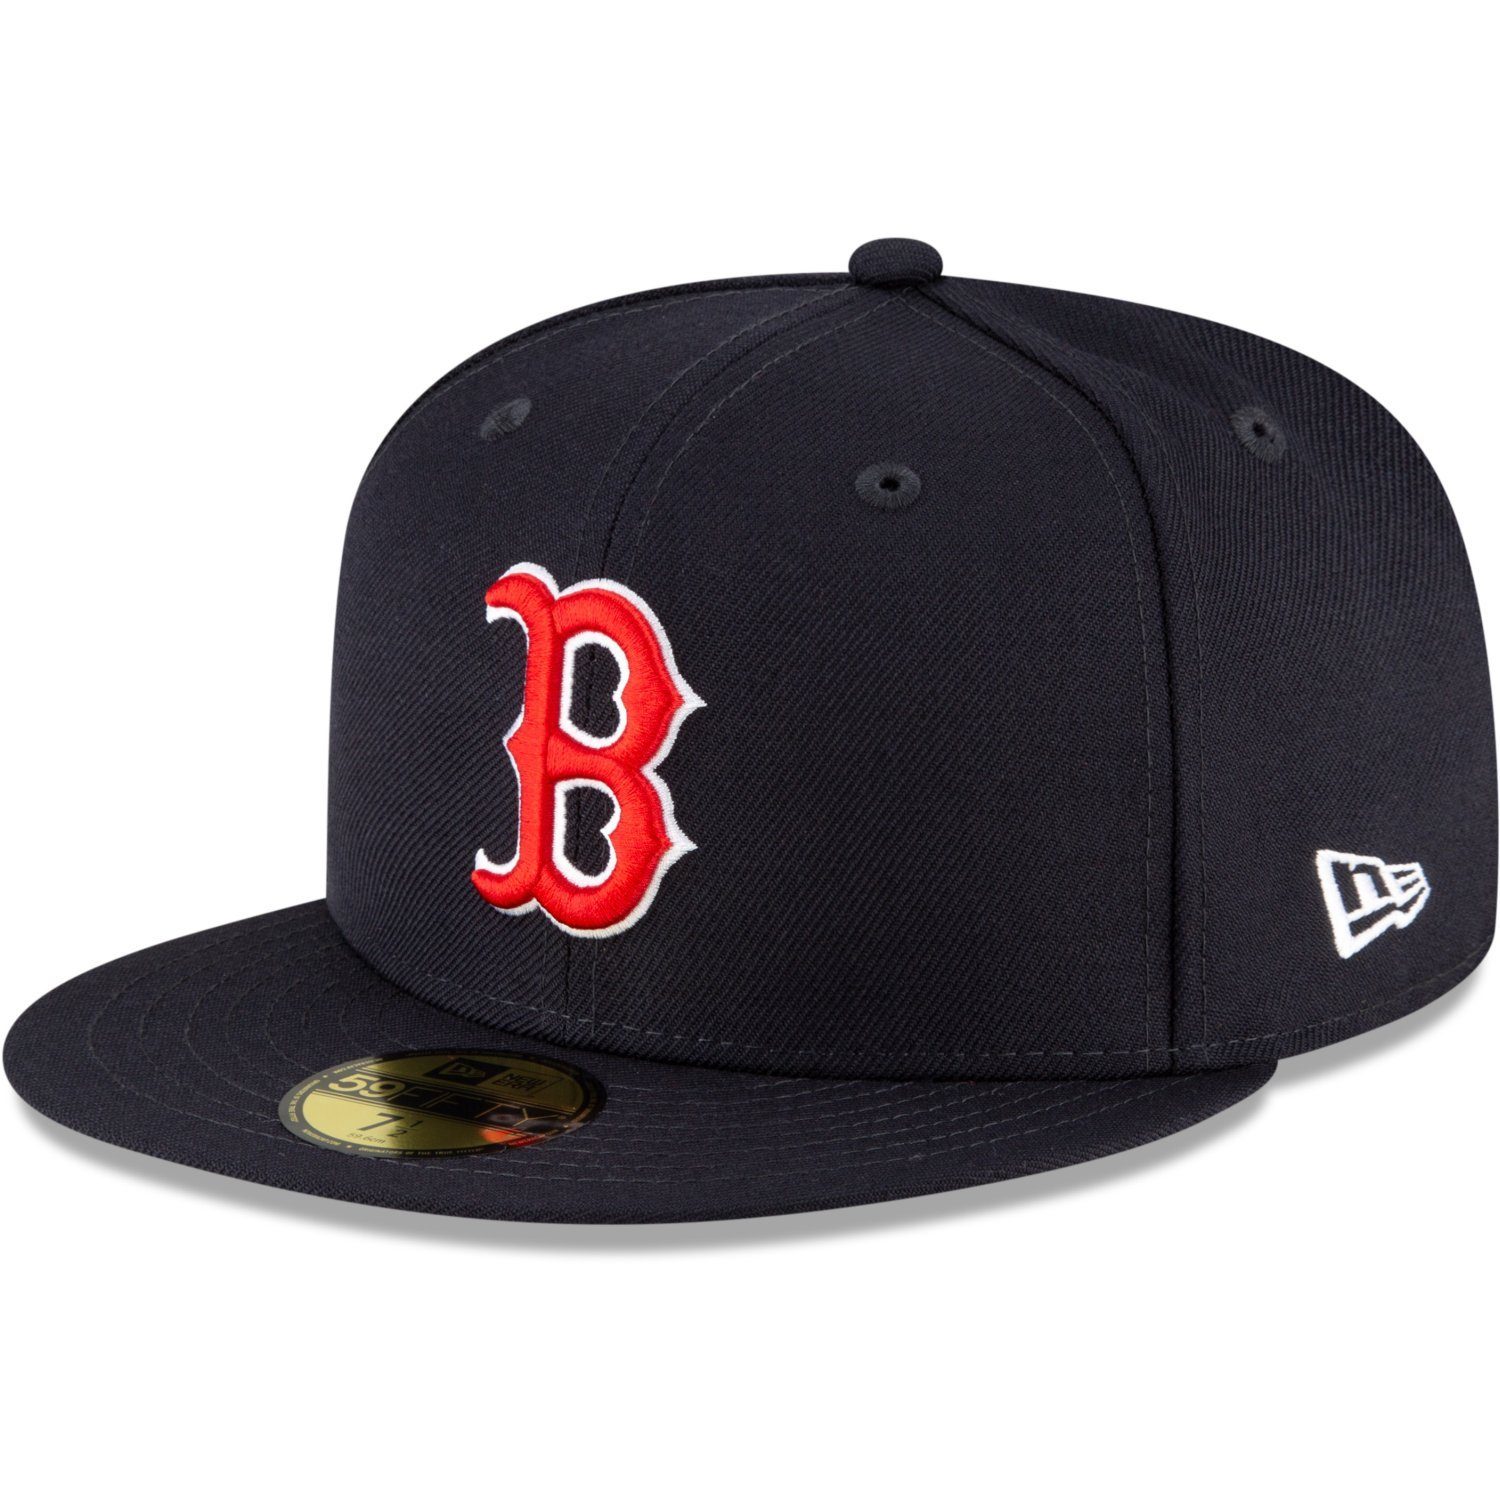 Era WORLD Fitted Red Cap Boston SERIES New Sox 59Fifty